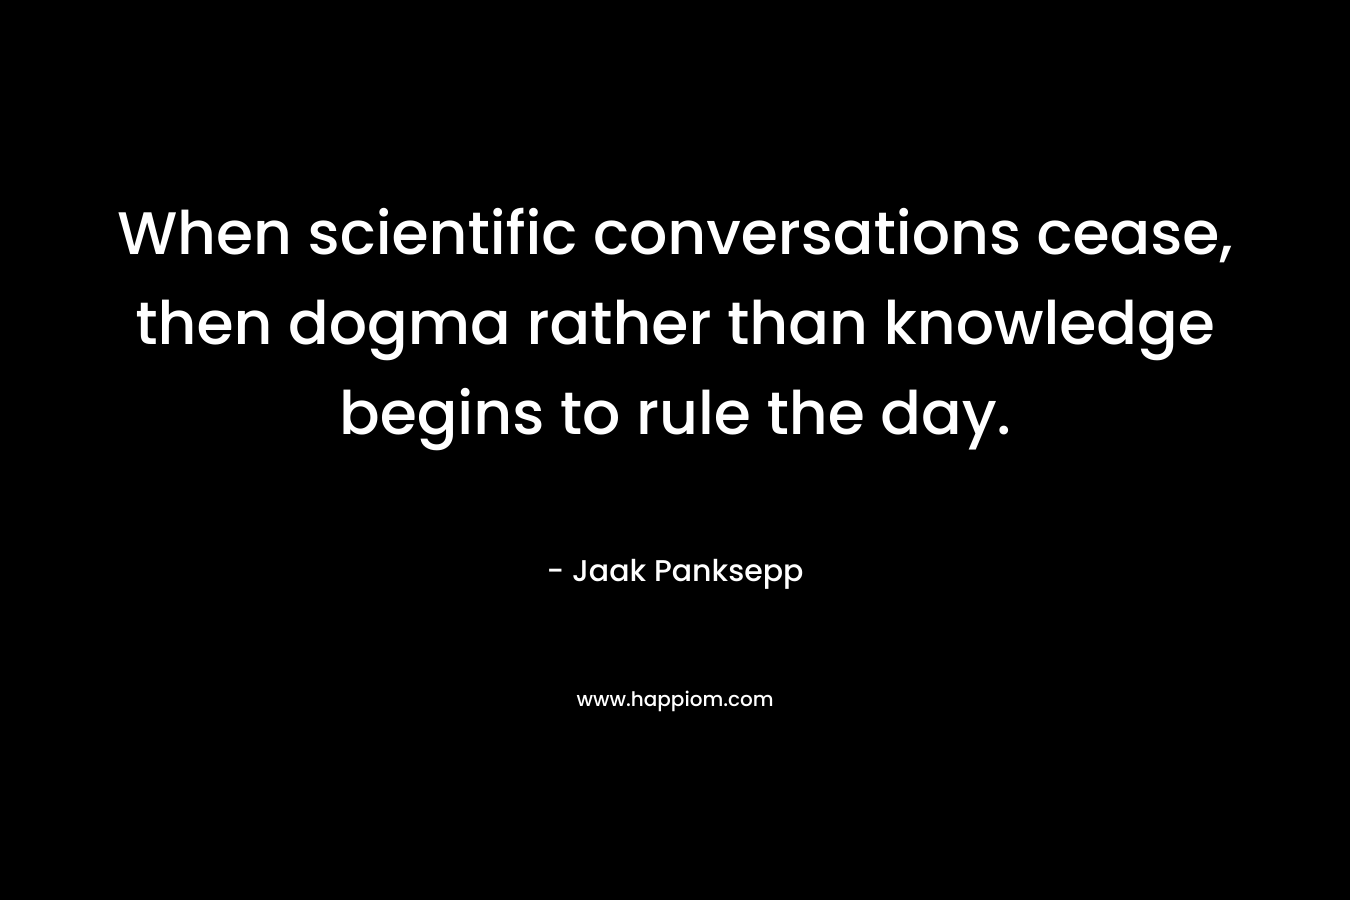 When scientific conversations cease, then dogma rather than knowledge begins to rule the day. – Jaak Panksepp